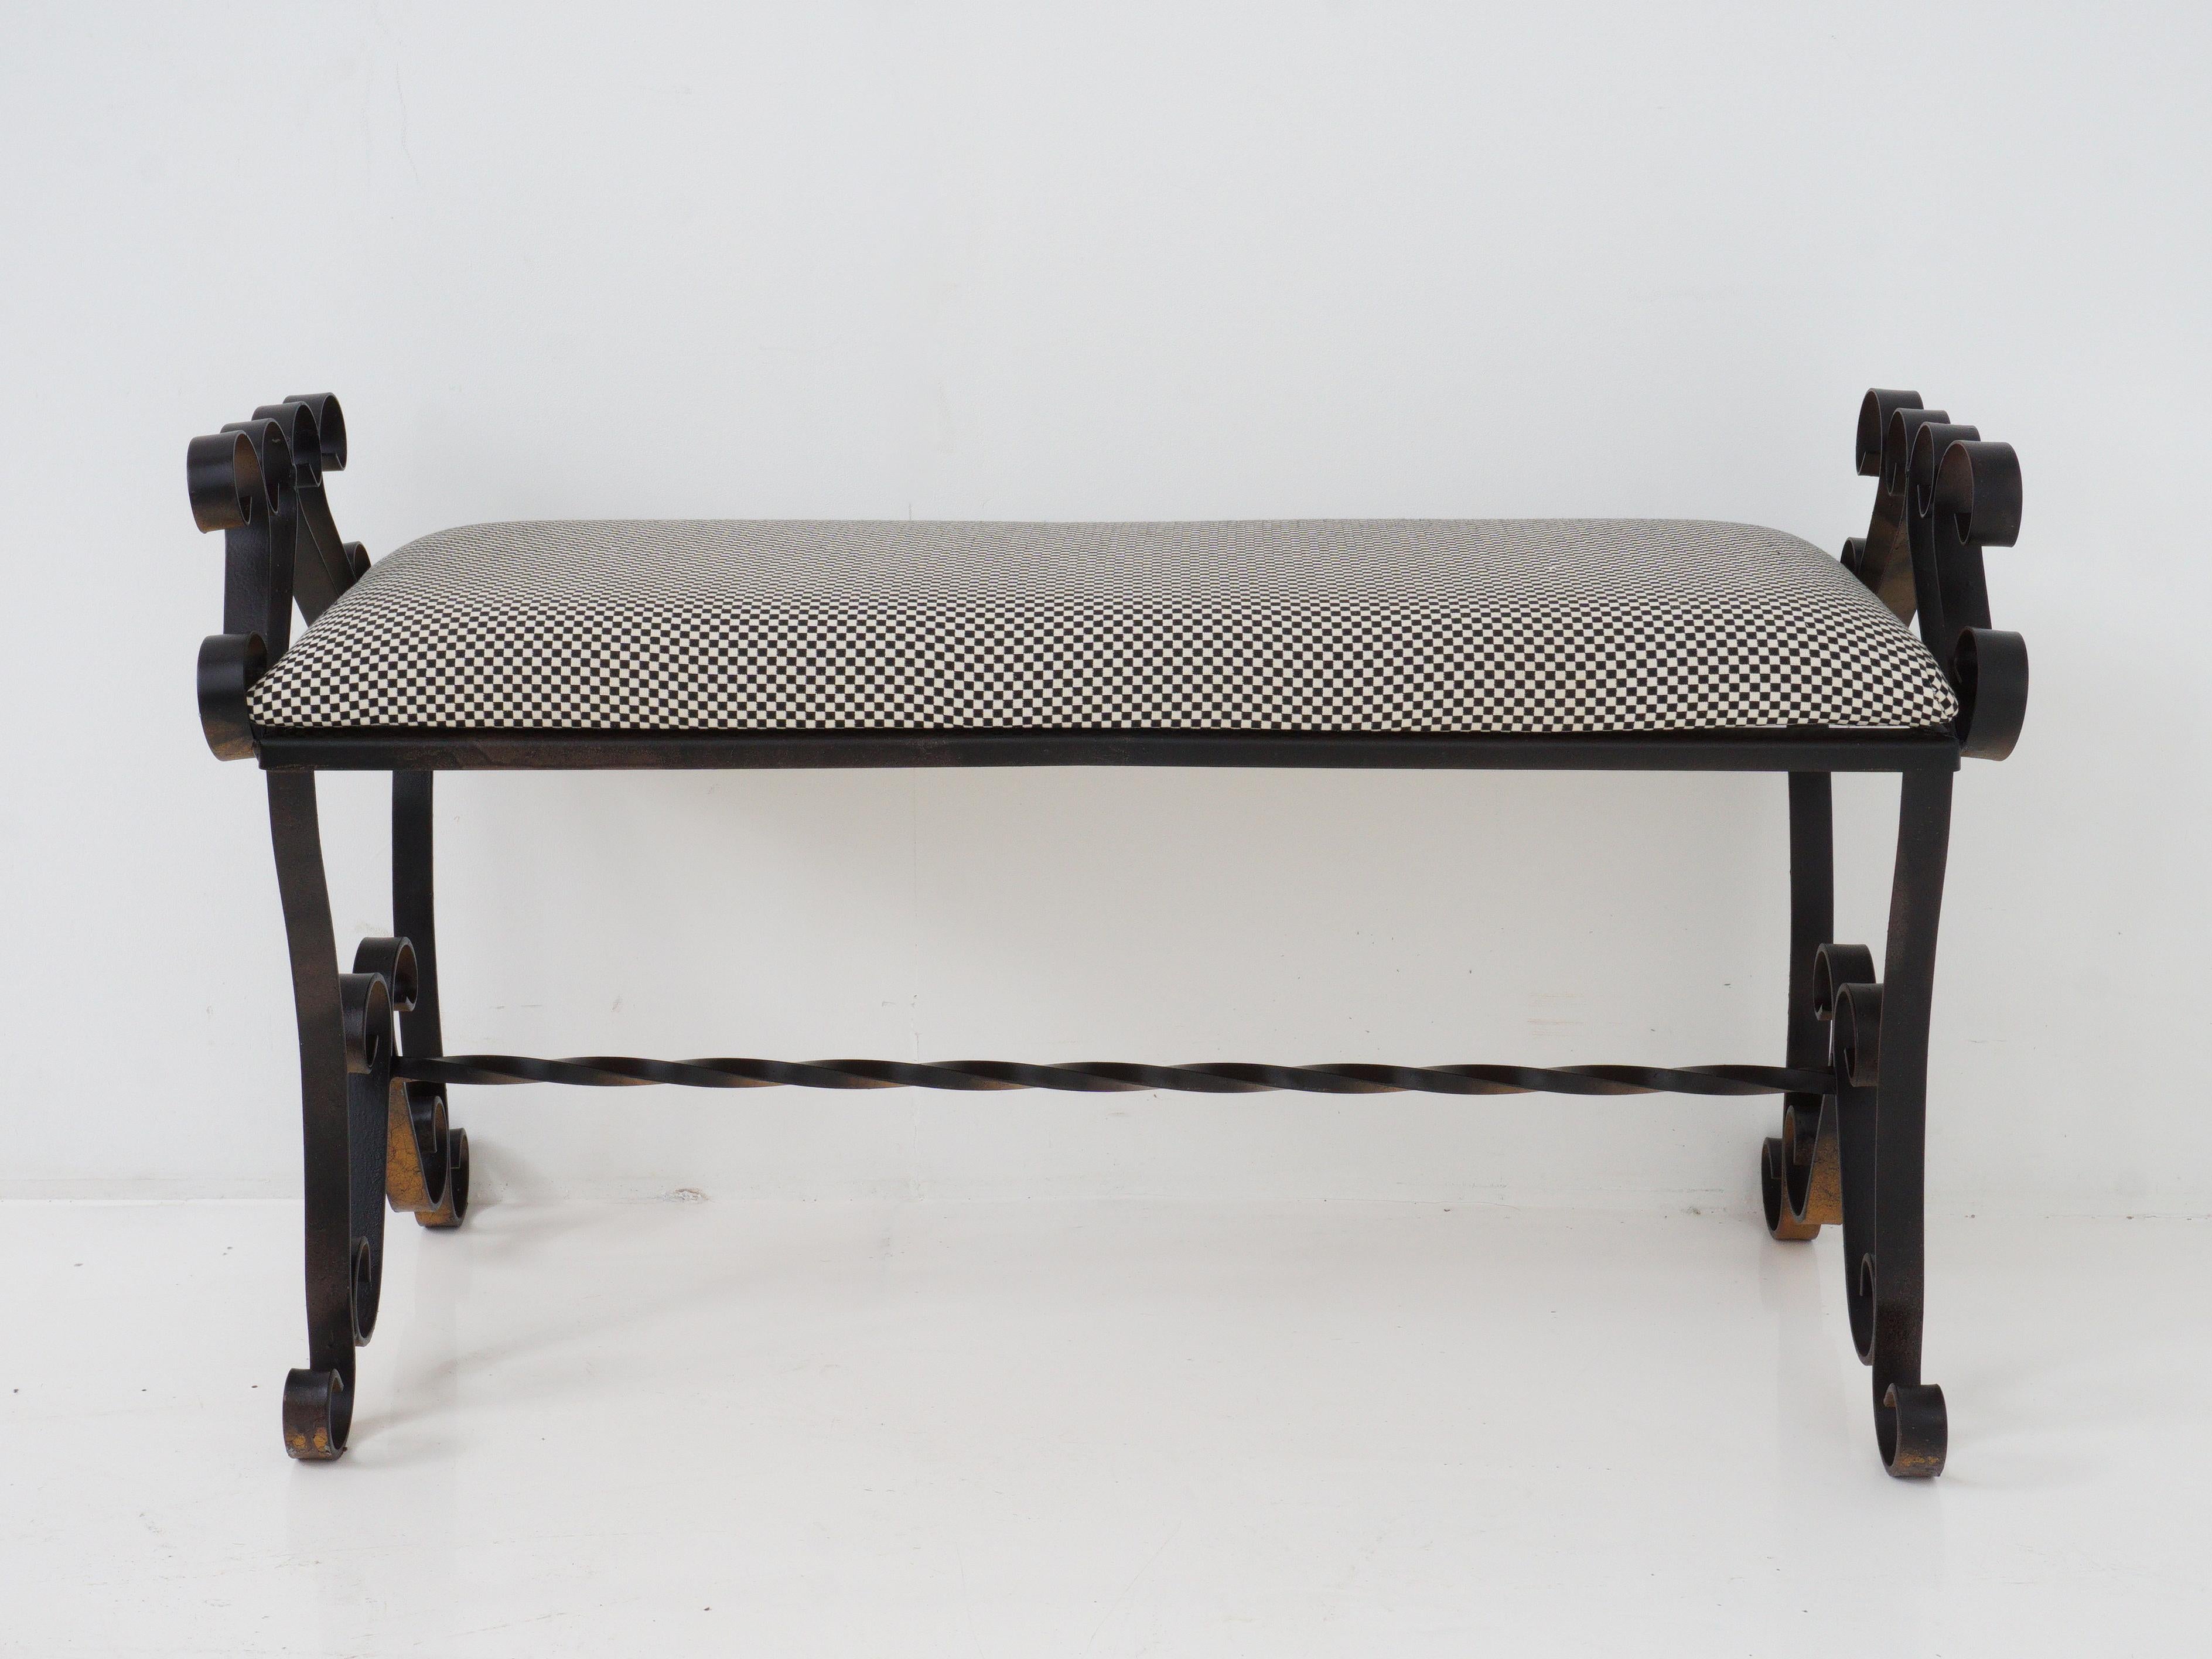 The Iron Scroll Entryway Bench is a stunning piece of furniture that combines functionality with elegant design. This bench features a sturdy iron frame in a scroll pattern, adding a touch of sophistication to any entryway or hallway. 

- 22